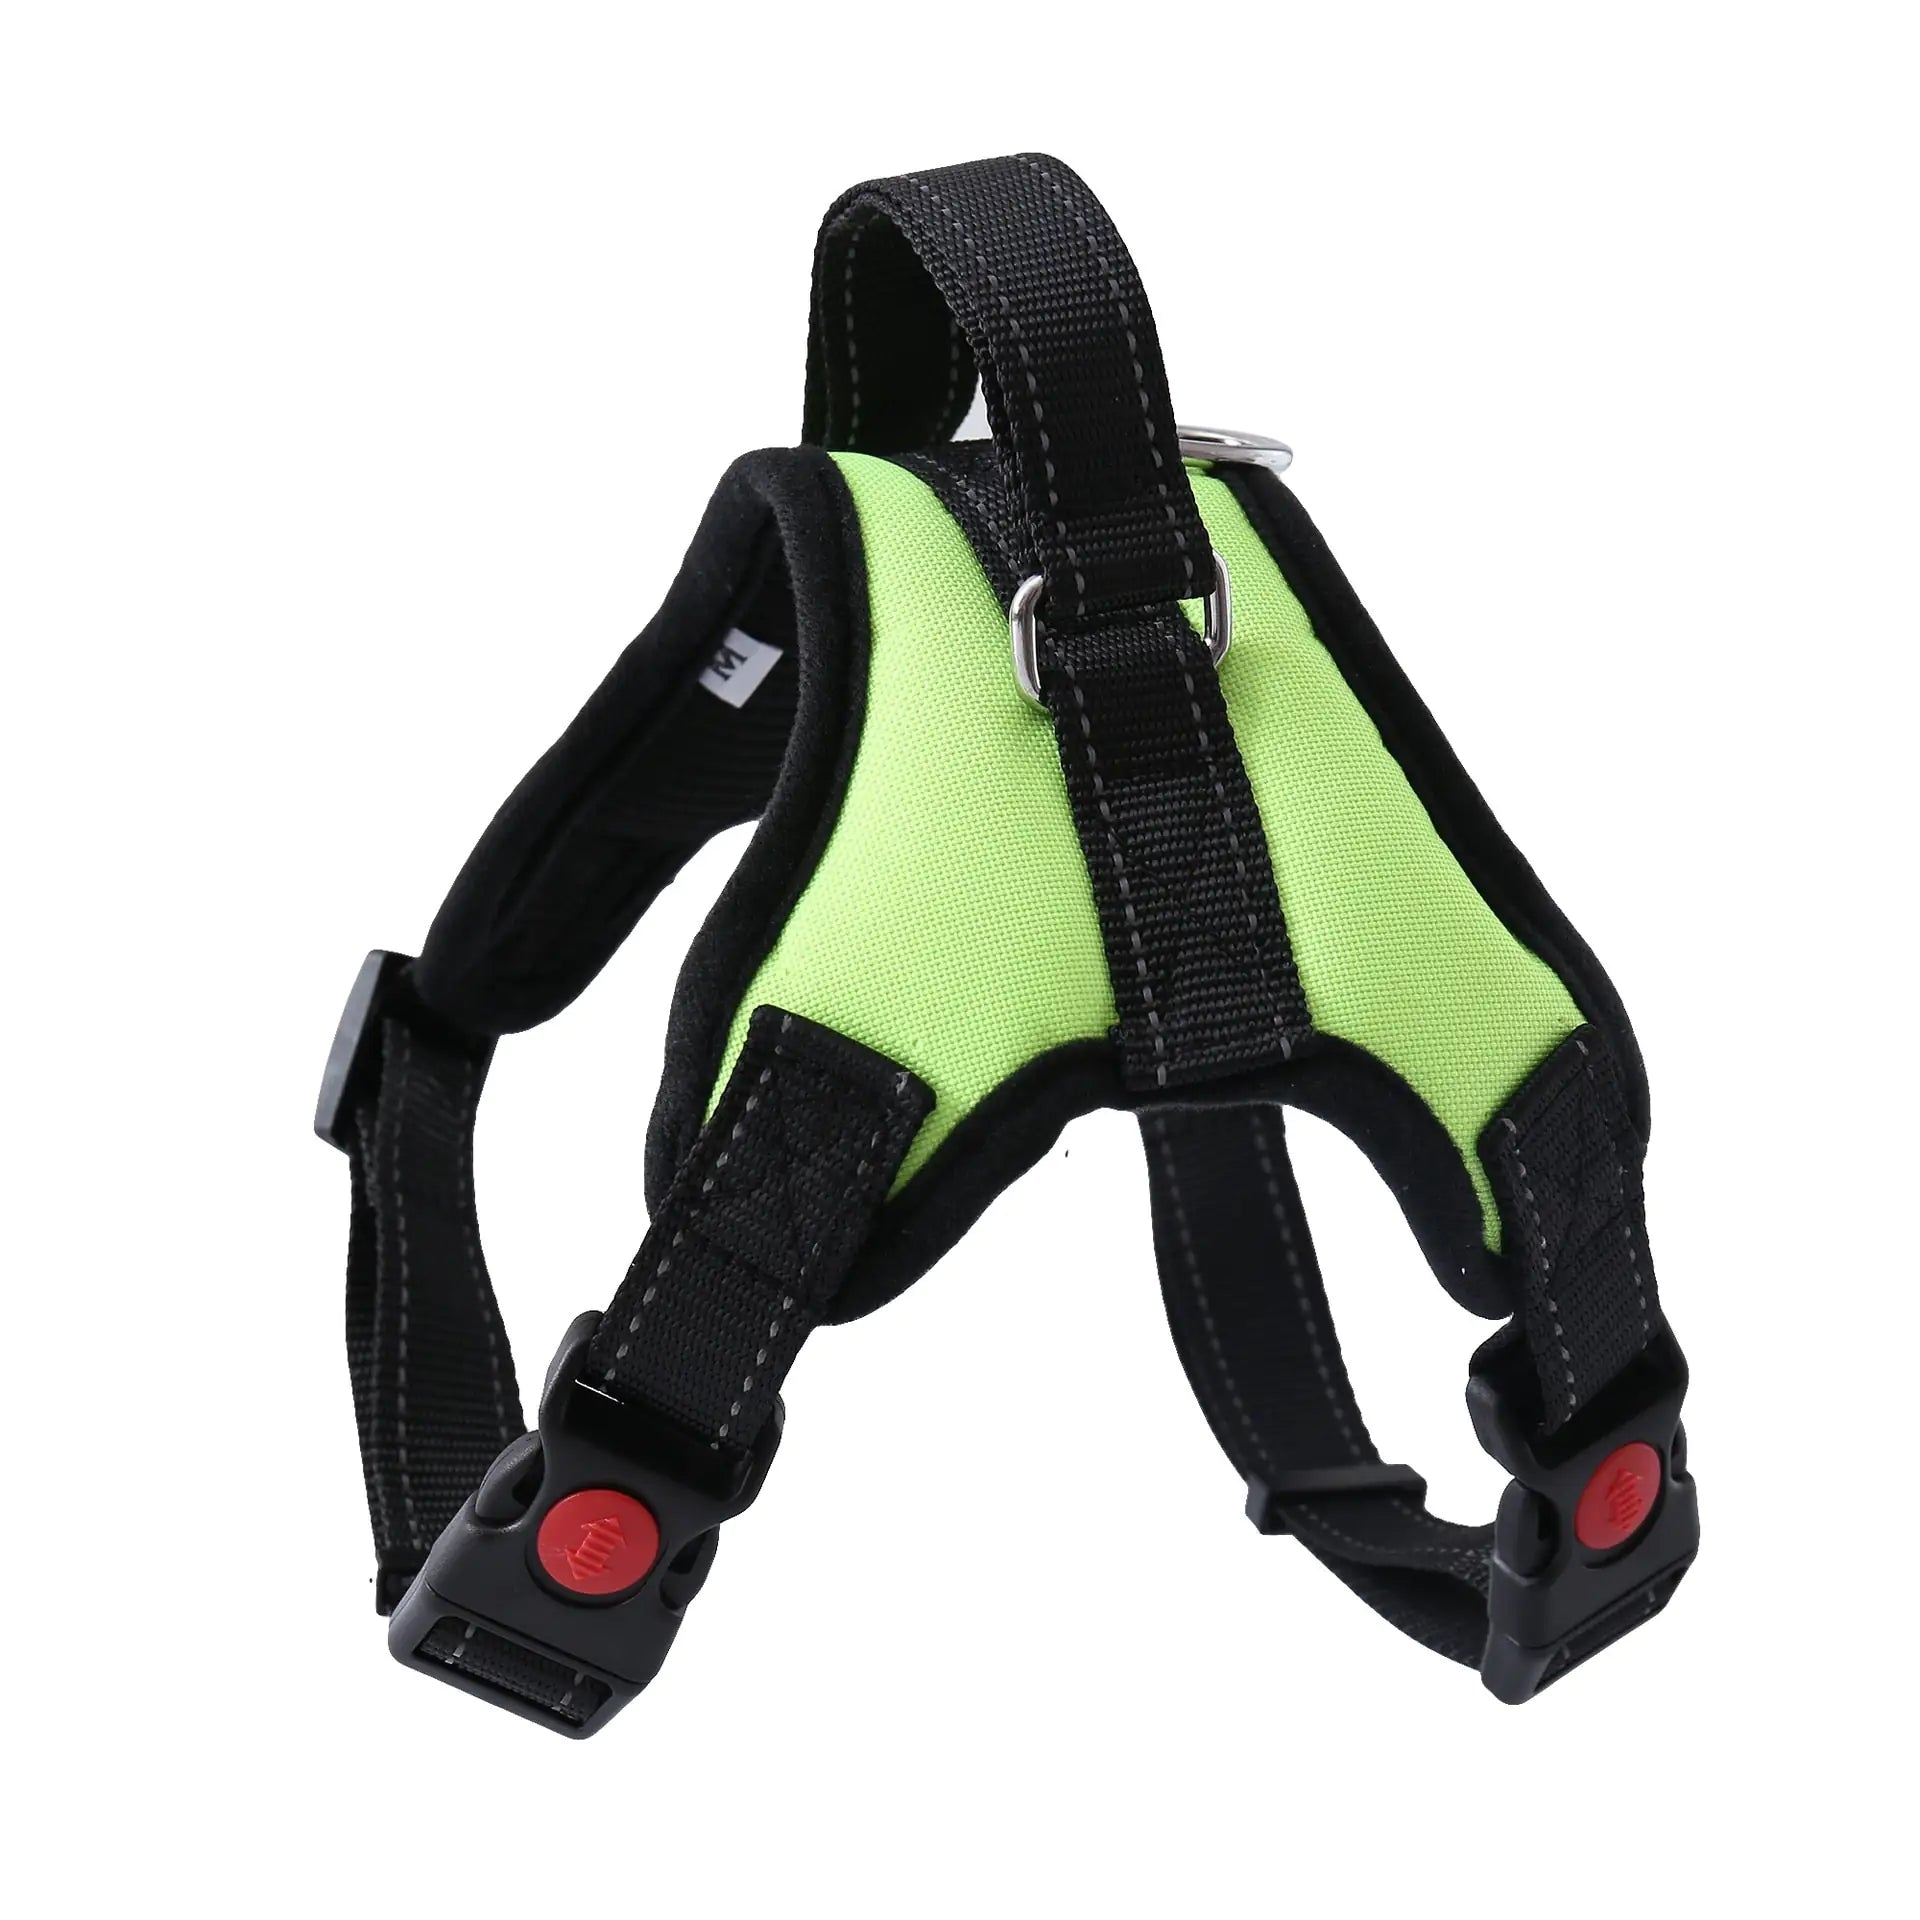 Pet Walking Harness: Adjustable Comfort for a Pawsitive Experience!